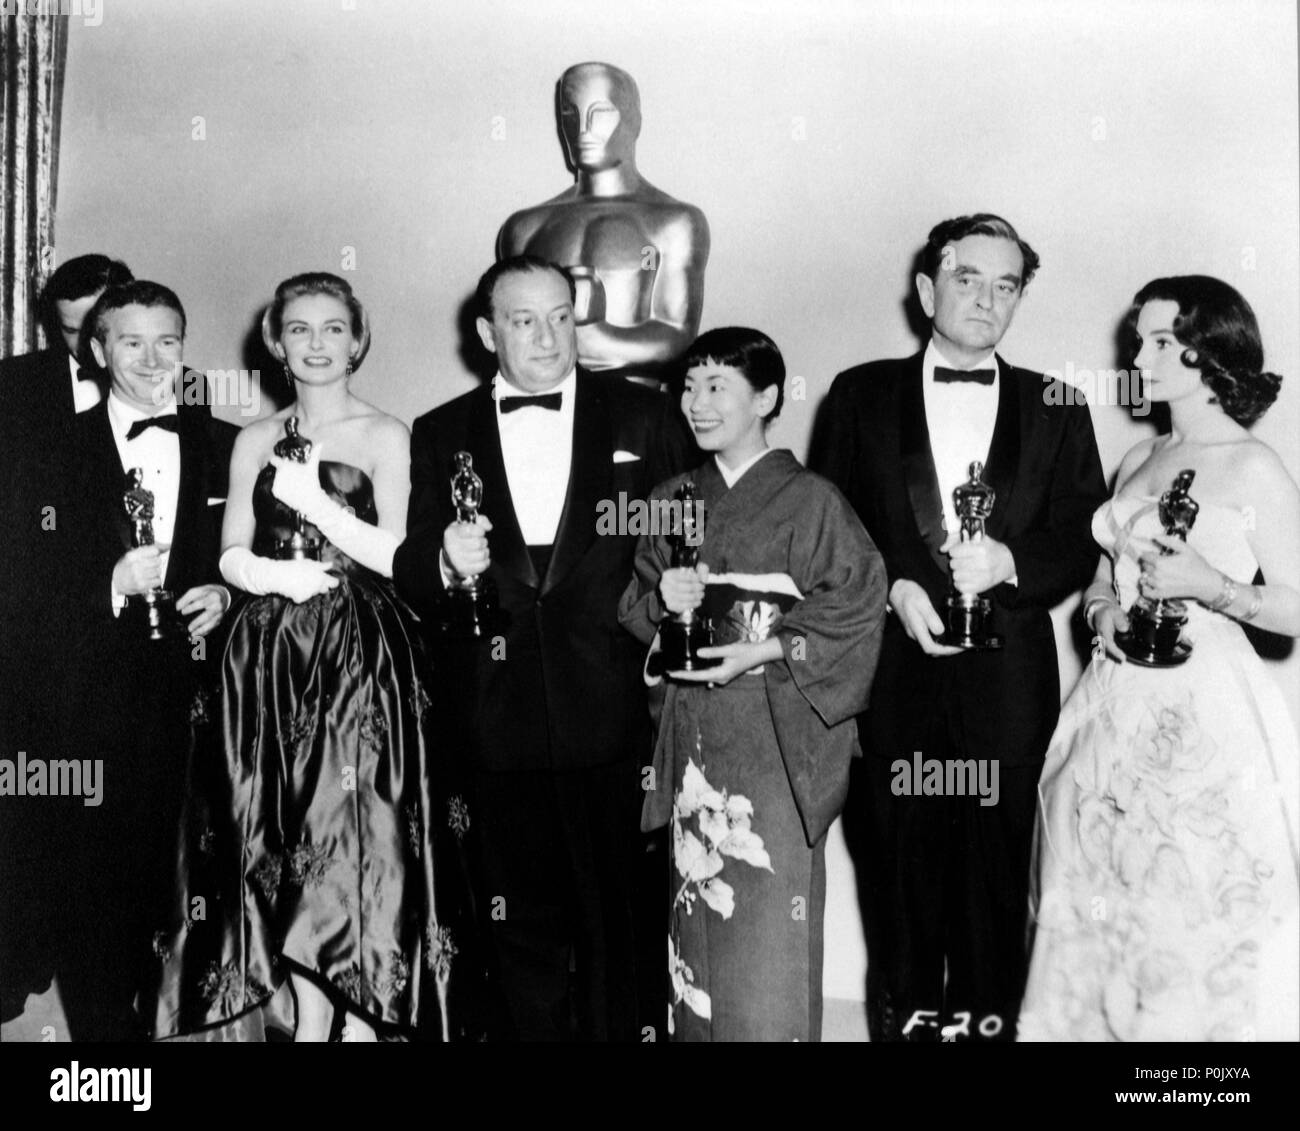 Description: The 30th Academy Awards / 1958.   Jeanne Simmons picks up on behalf of Alec Guinness the prize to the best actor for ' The Bridge on the River Kwai'. Red Buttons, best actor in supporting role for 'Sayonara'. Joanne Woodward, best actress for 'The Three Faces of Eve'. The producer, Sam Spiegel receives the best picture award for 'The Bridge on the River Kwai'. Miyoshi Umeku, best actress for 'Sayonara'. David Lean, best director for 'The Bridge on the River Kwai'..  Year: 1958.  Stars: RED BUTTONS; JOANNE WOODWARD; DAVID LEAN; MIYOSHI UMEKI; SAM SPIEGEL; JEAN SIMMONS. Stock Photo